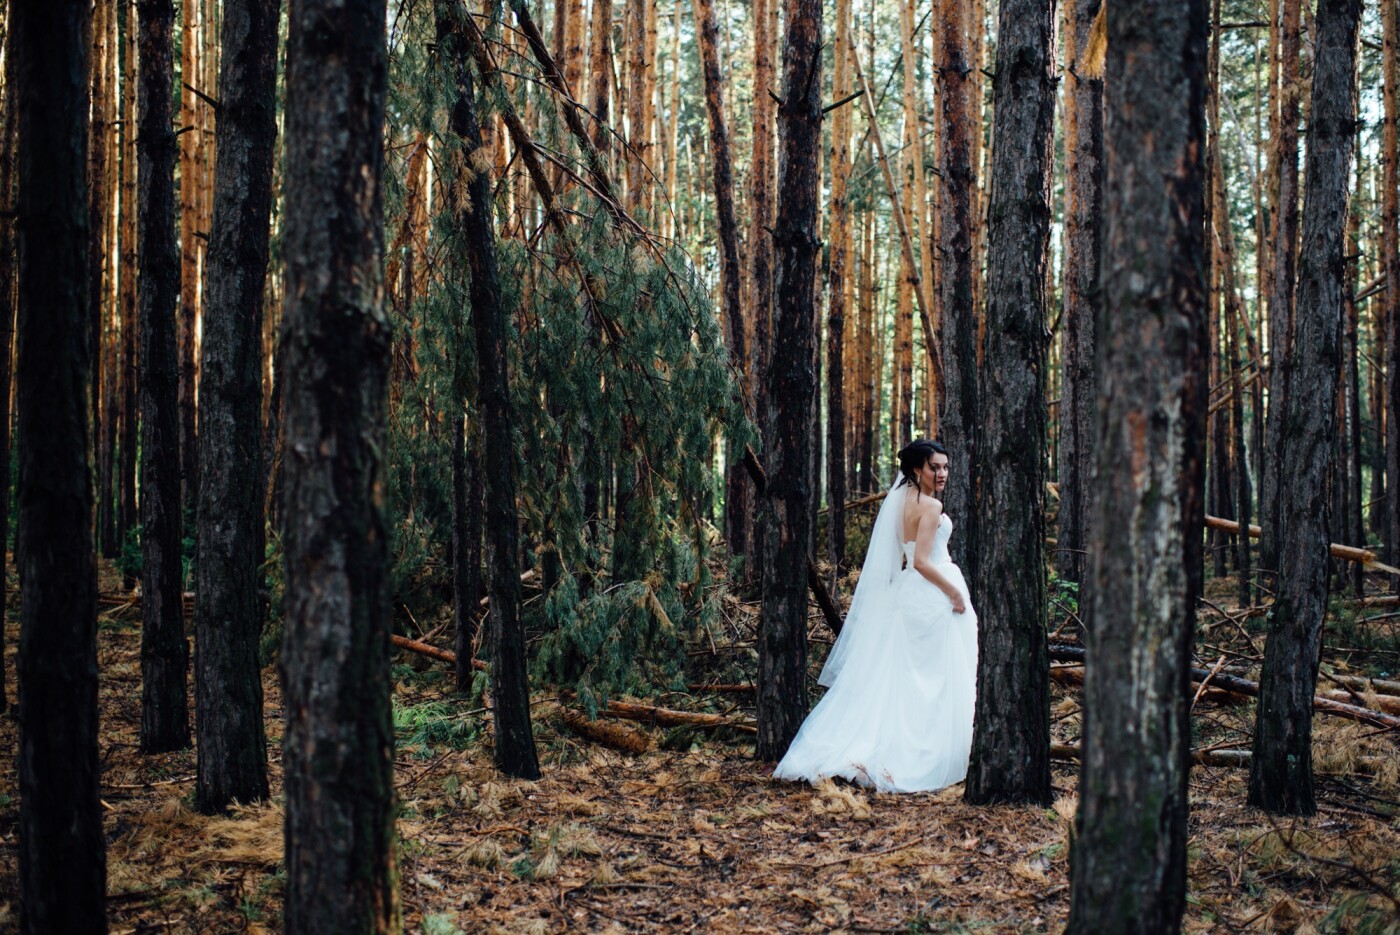 This is an amazing forest we find in central Russia. It was the road to the tiny lake named Borovushka, which situated near Chelyabinsk city, Russia.<br />
Ancient pines swayed by every breath of wind. I wanted to capture the bride among the broken trees and convey the atmosphere of the grandeur of nature.